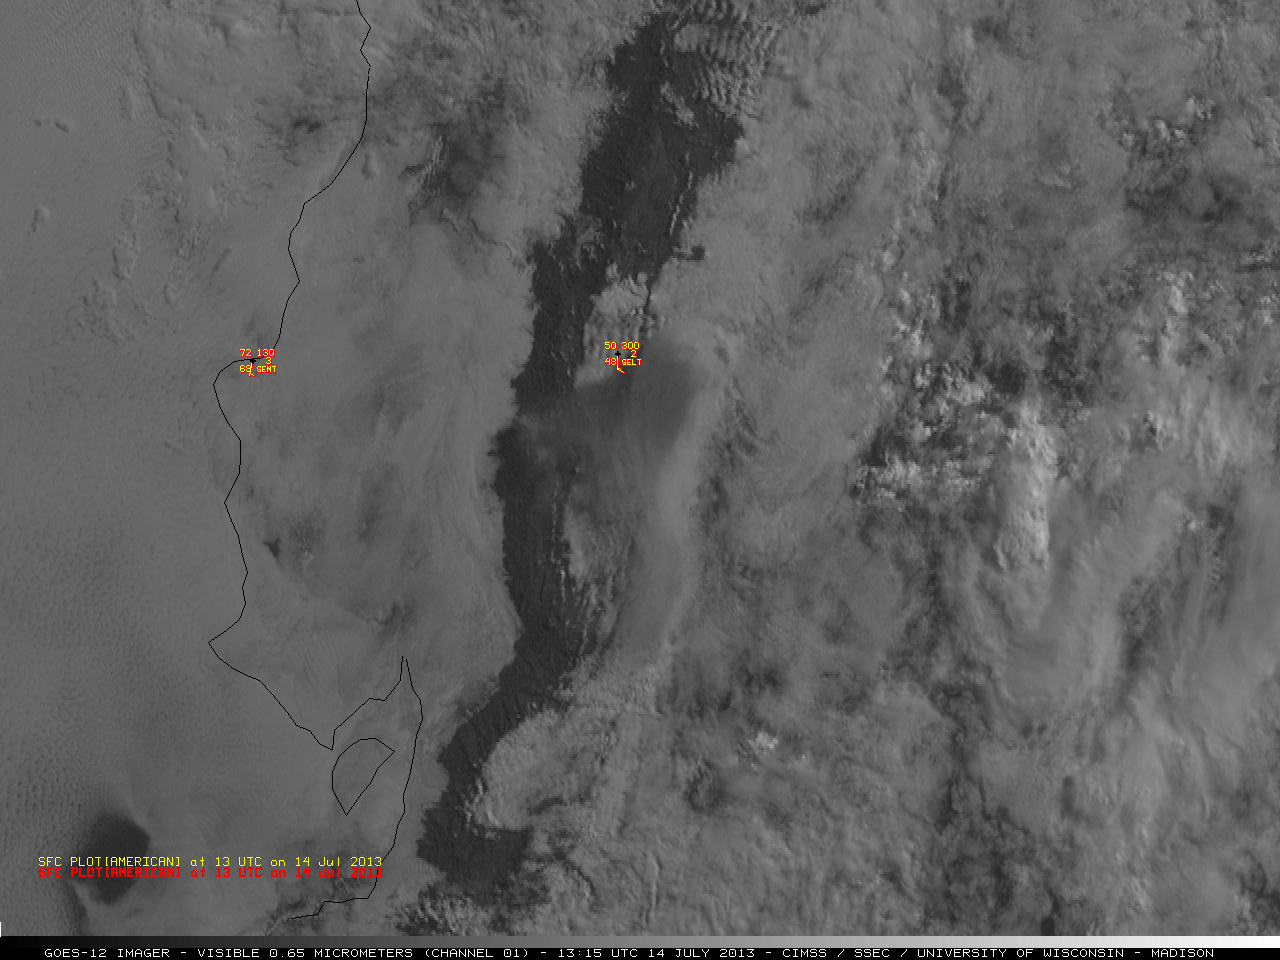 GOES-12 0.65 Âµm visible channel images (click image to play animation)